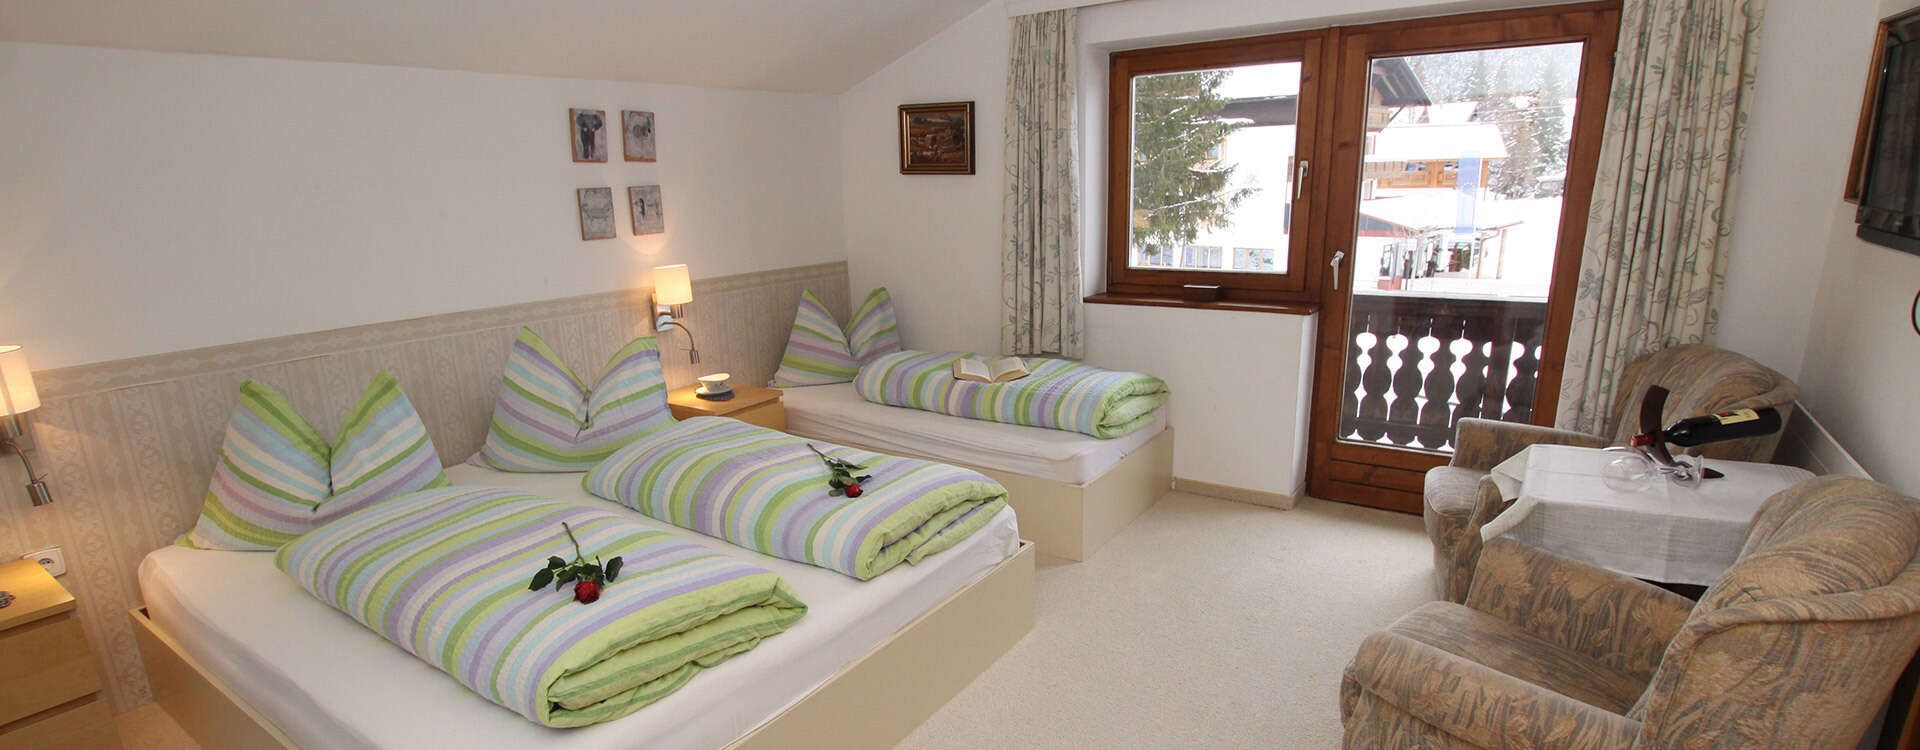 Room in the Alice holiday home in Tyrol